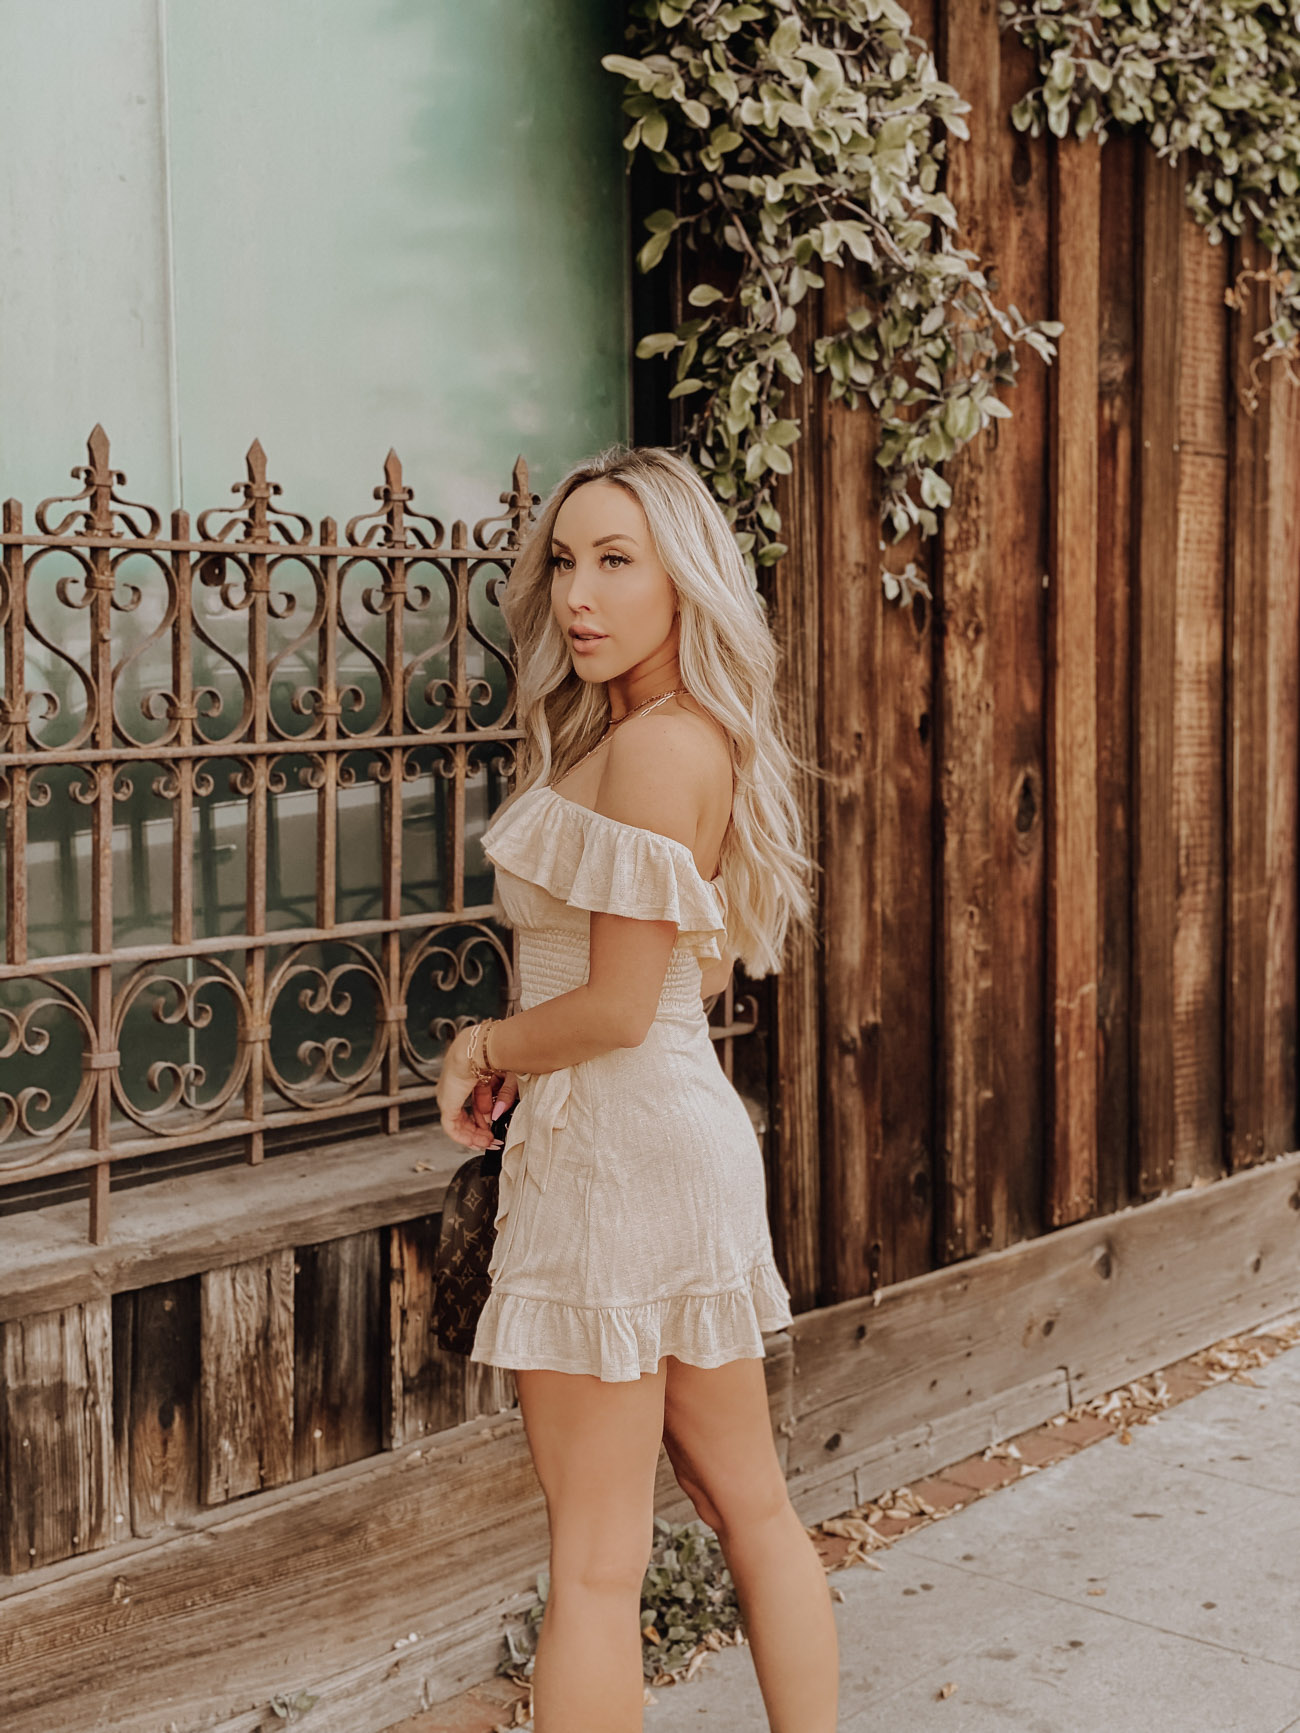 Spring Dress Inspo | Dress & Sneakers | Revolve Dress | Louis Vuitton Backpack | Blondie in the City by Hayley Larue